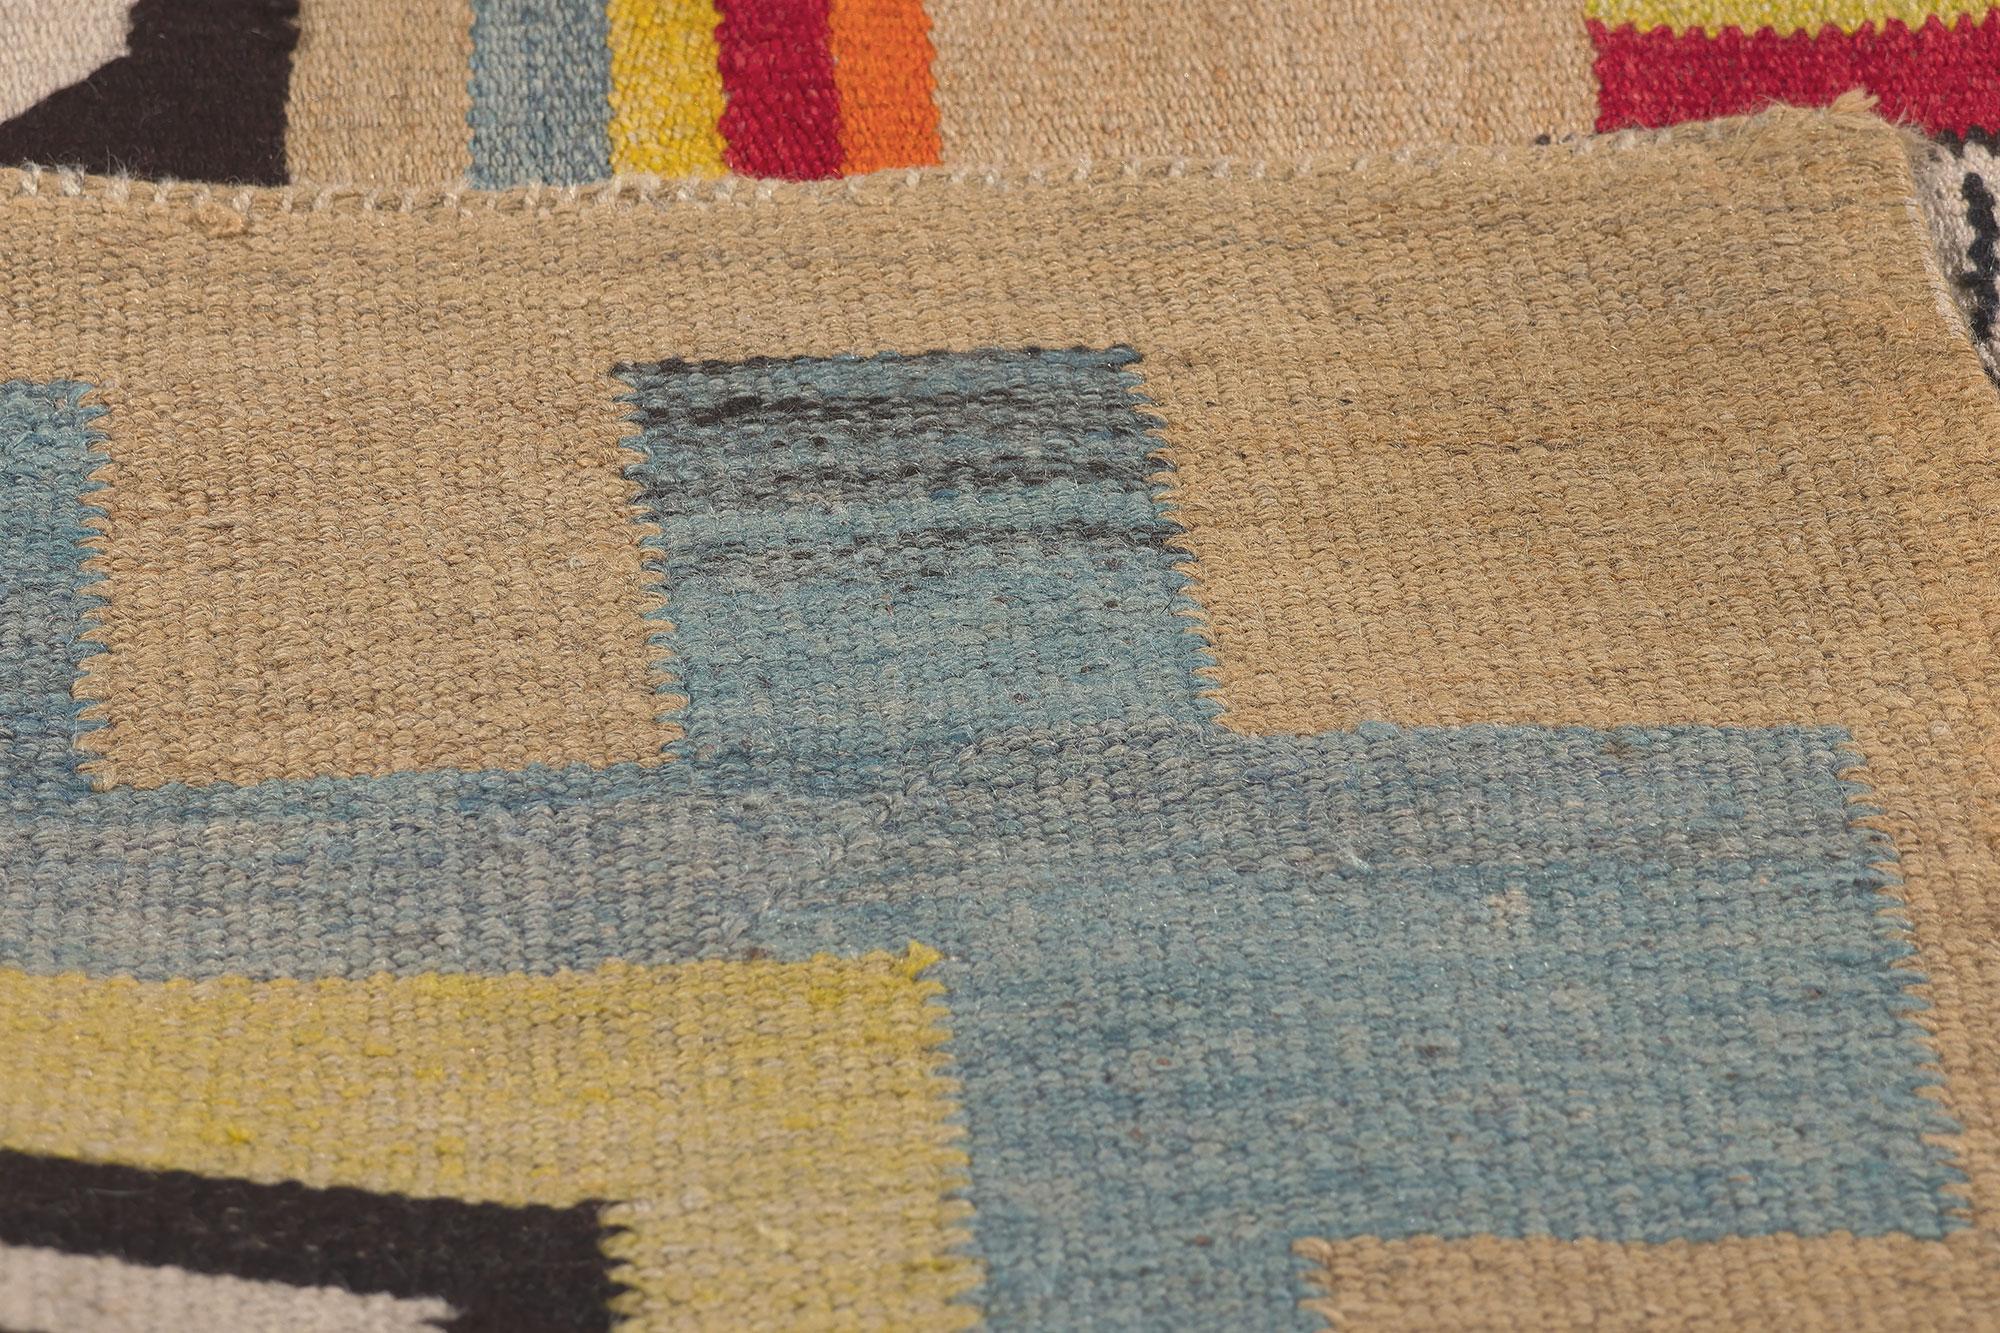 Hand-Woven Colorful Vintage South American Kilim Rug with Pre-Incan Viracocha Deity  For Sale